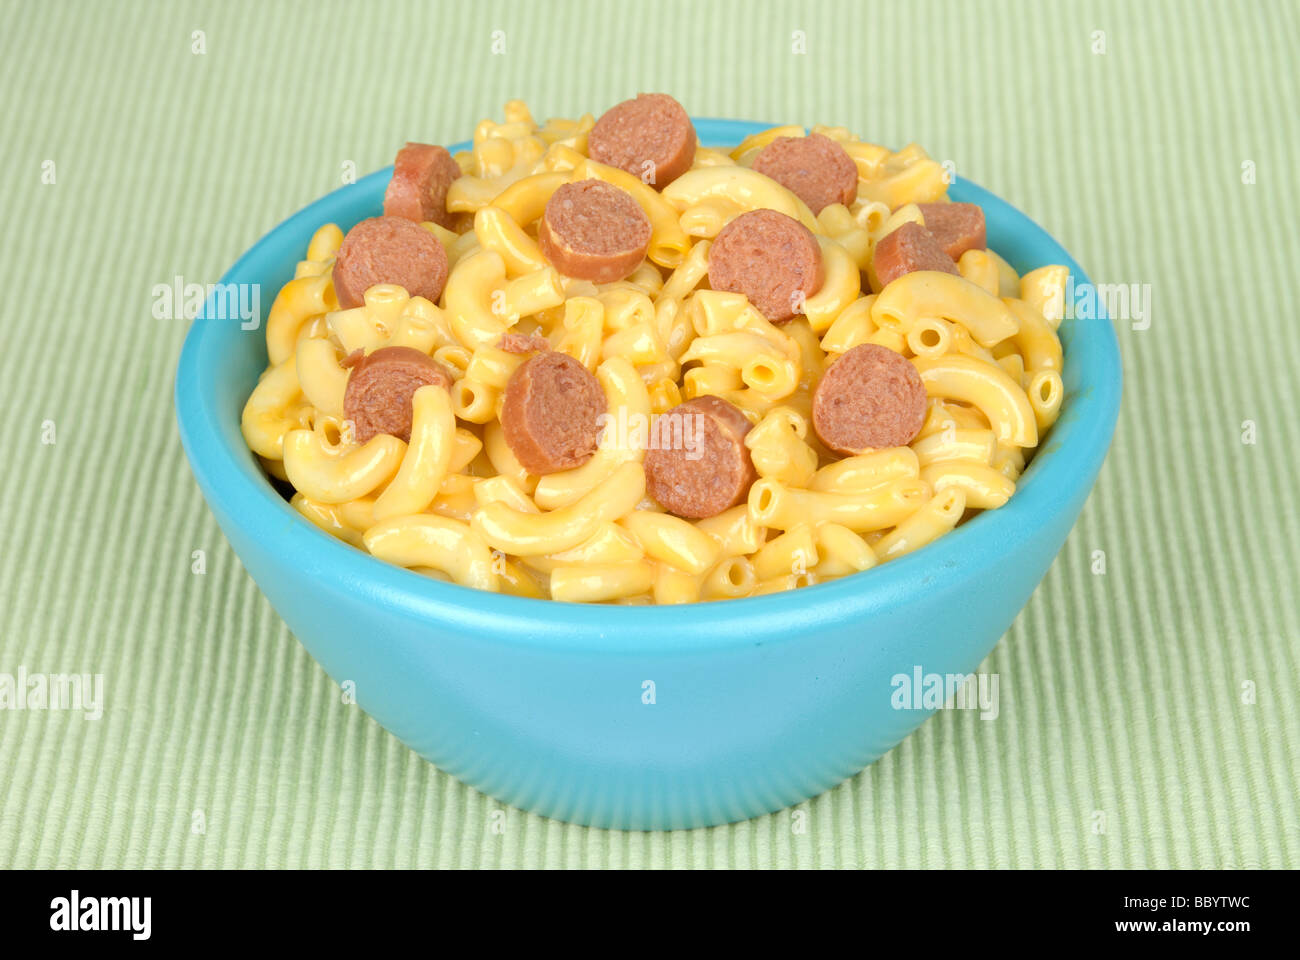 A bowl of macaroni and cheese with tasty hotdog slices Stock Photo